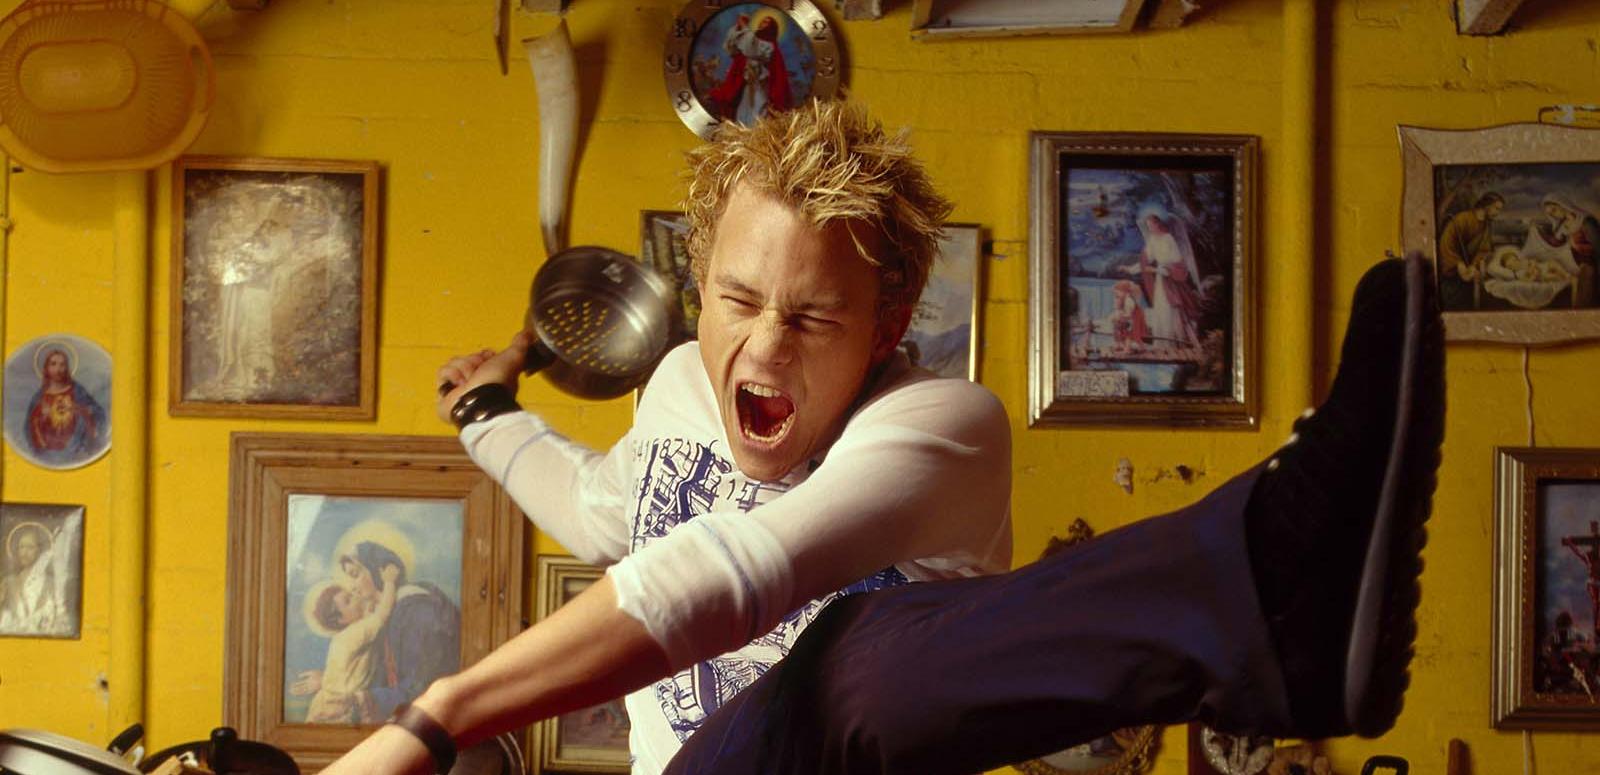 Actor Heath Ledger striking a dramatic pose with his arms out, one leg up in the air and his mouth open wide and eyes shut. He is in a yellow kitchen.